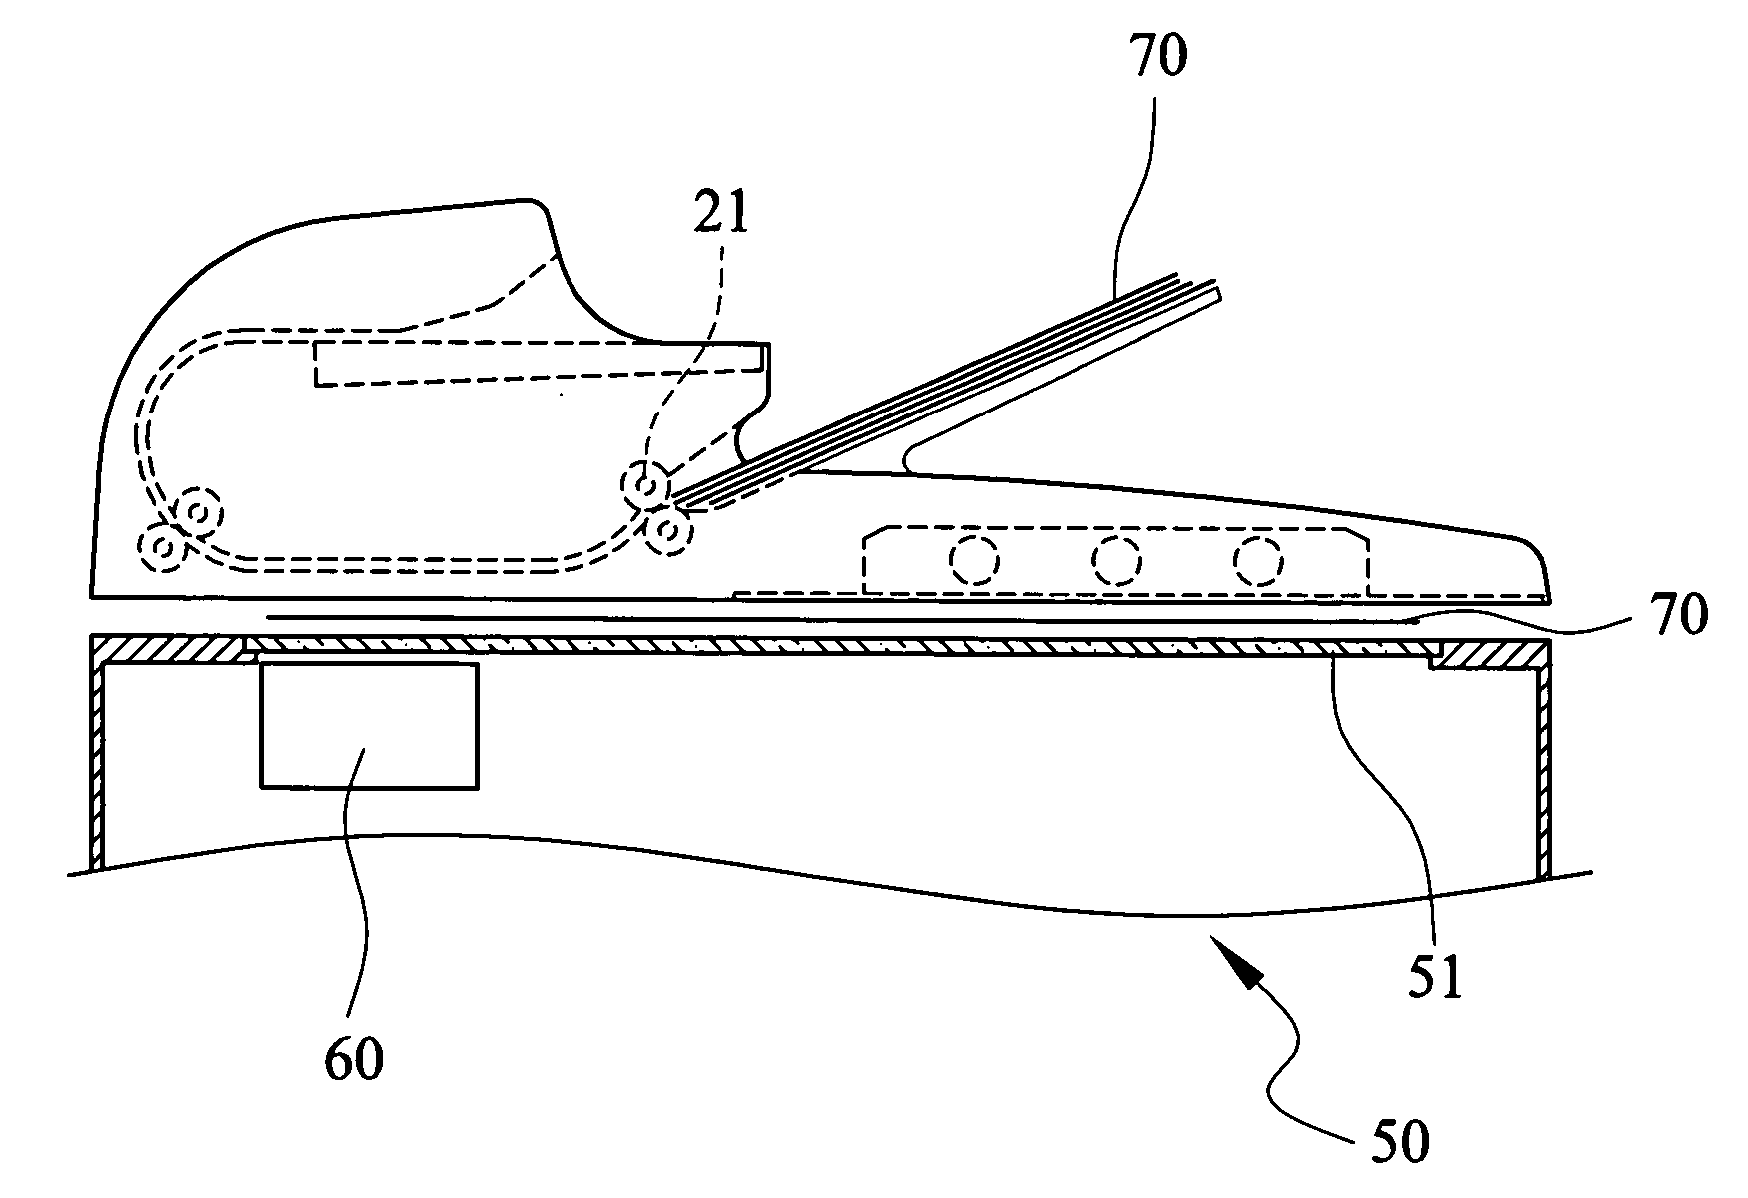 Media feeding device with scanning and fixing functions for transparent documents